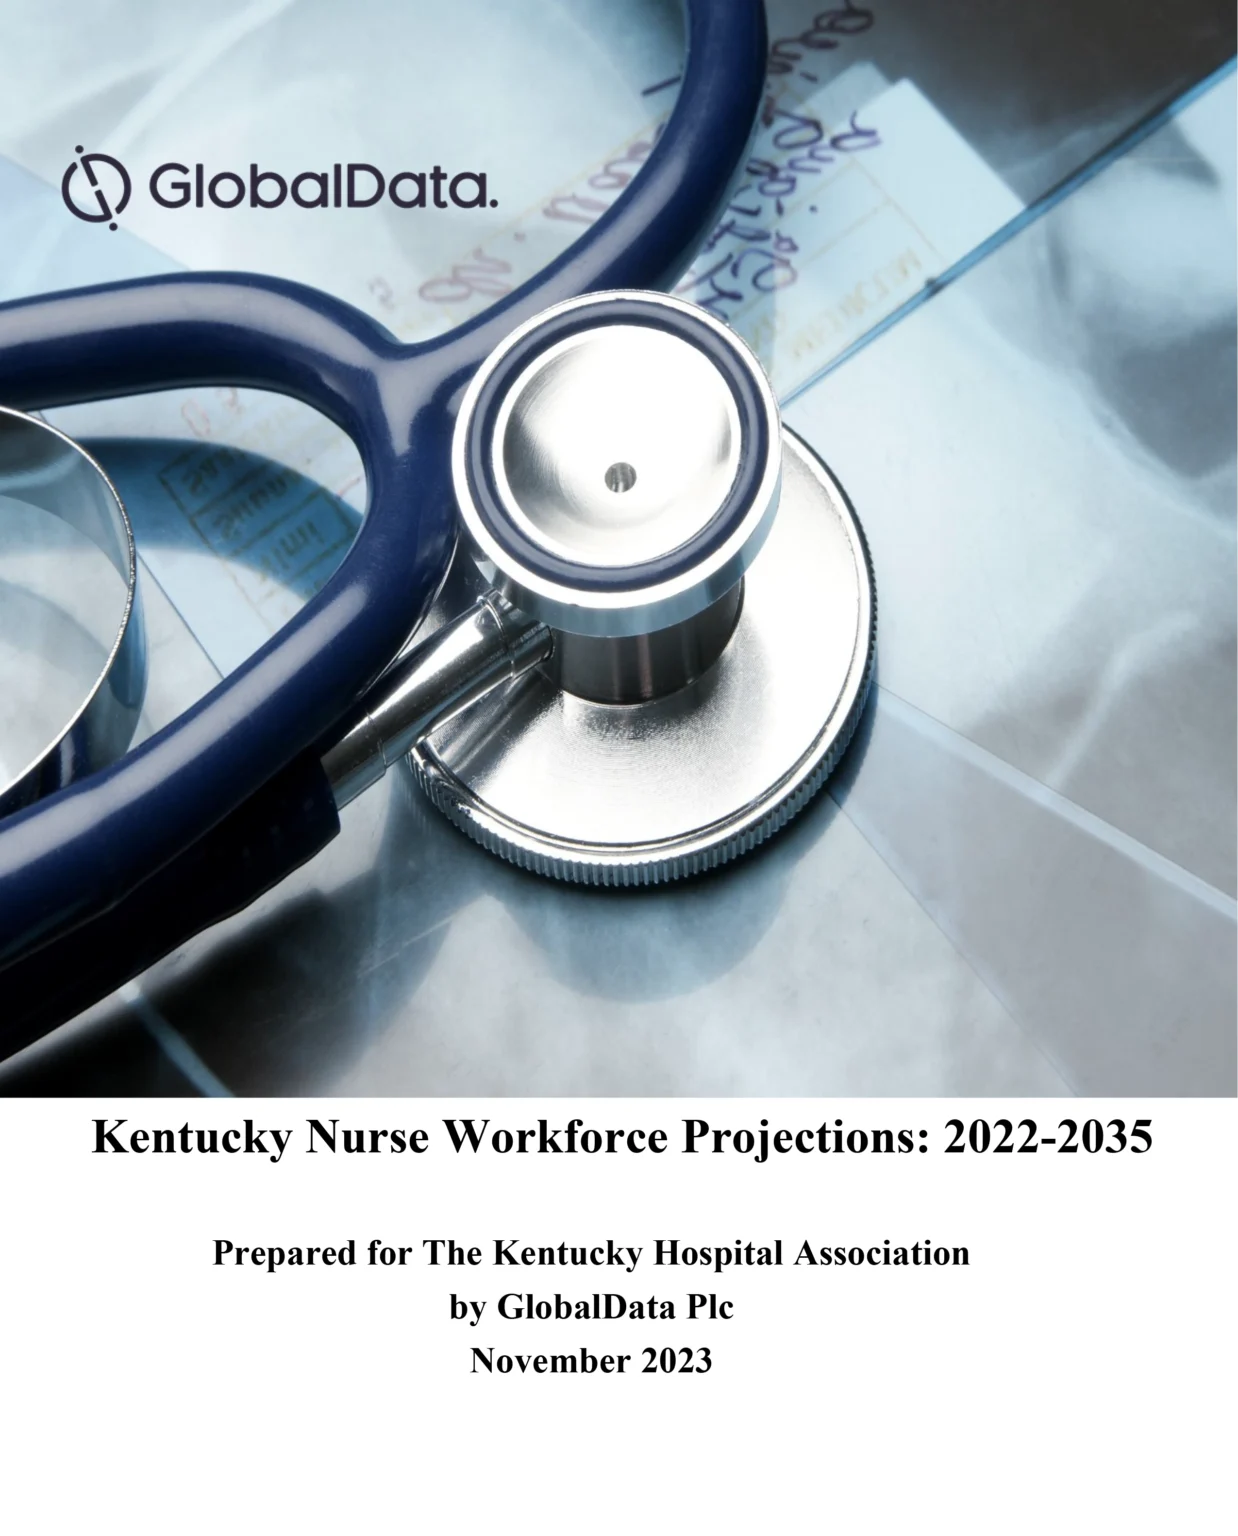 Kentucky Nurse Workforce Projections Report 2022 - 2035 cover image